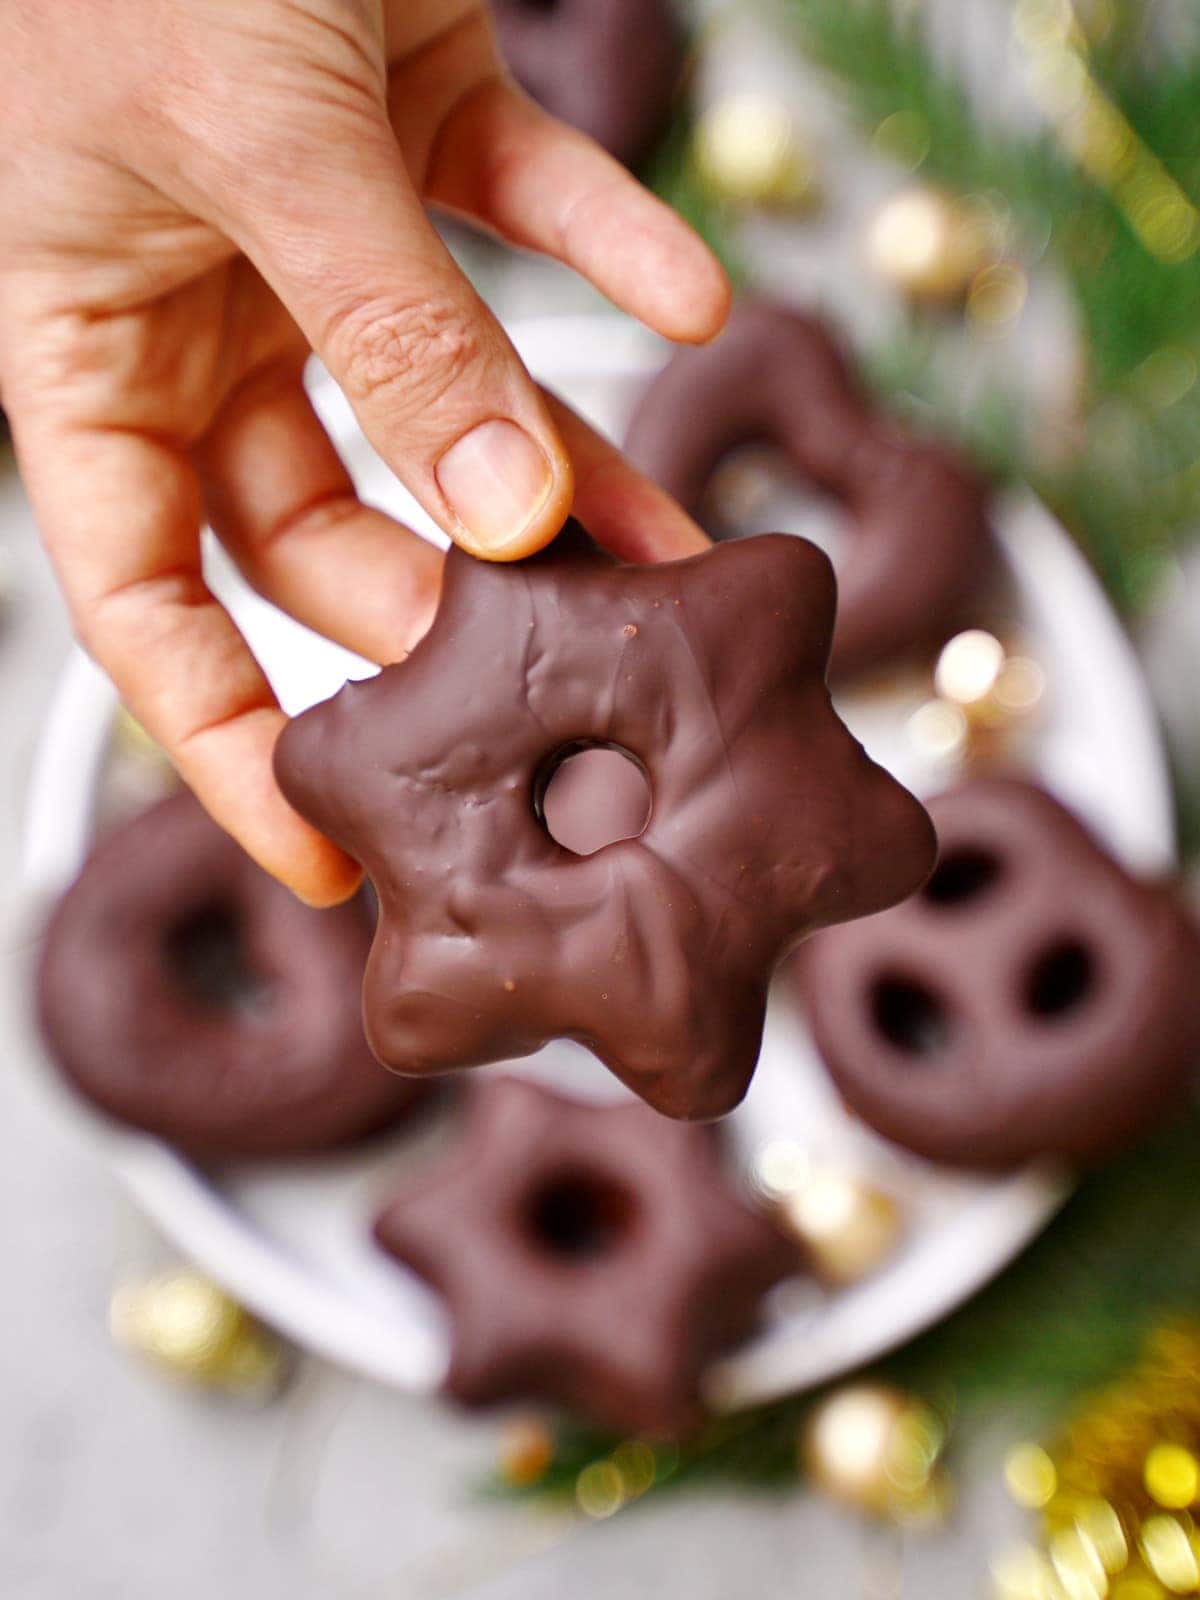 hand holding a Lebkuchen star-shaped cookie